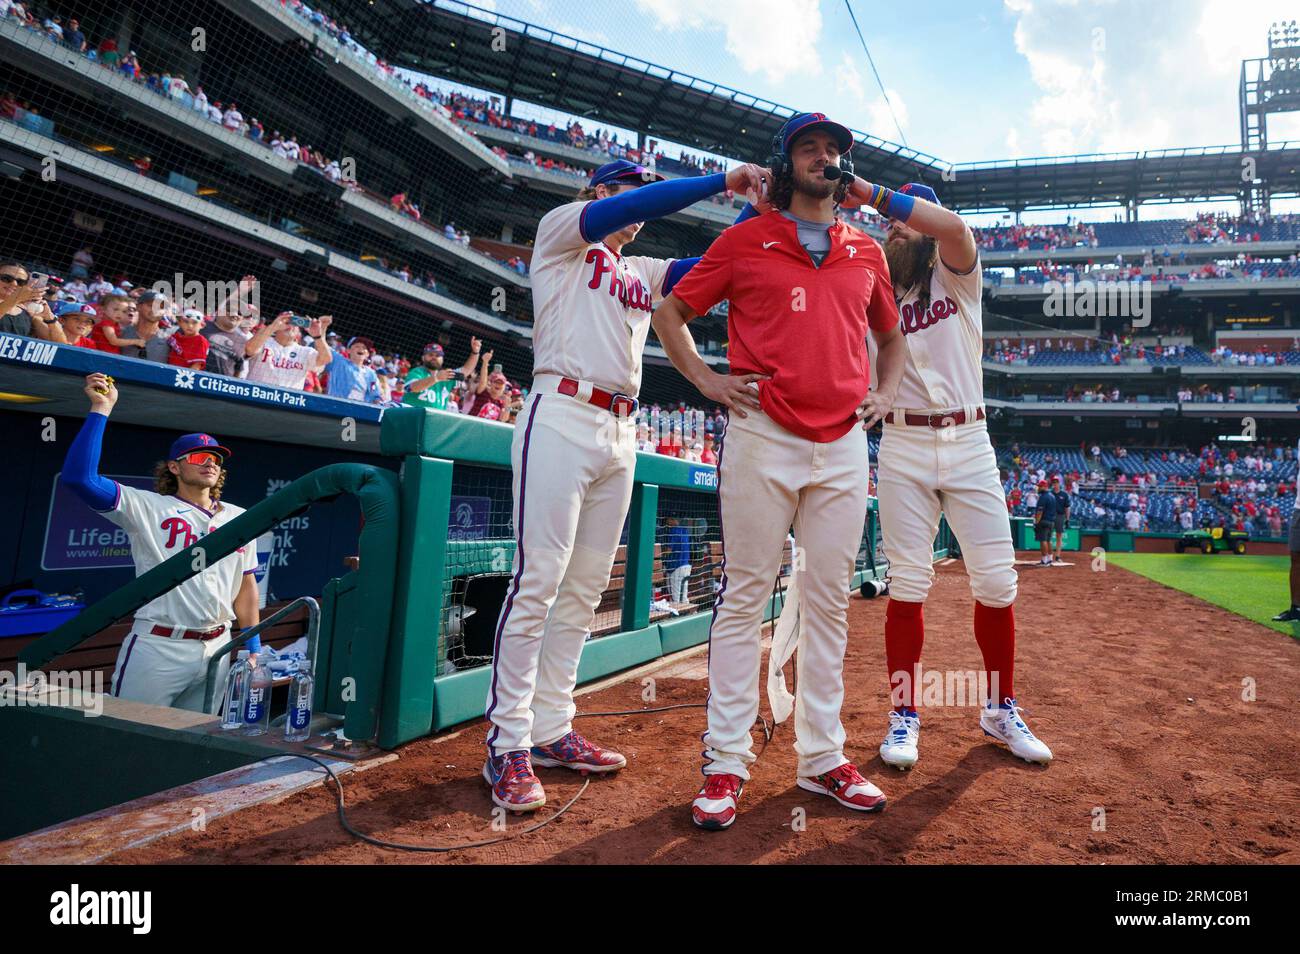 3,000 Aaron nola Stock Pictures, Editorial Images and Stock Photos